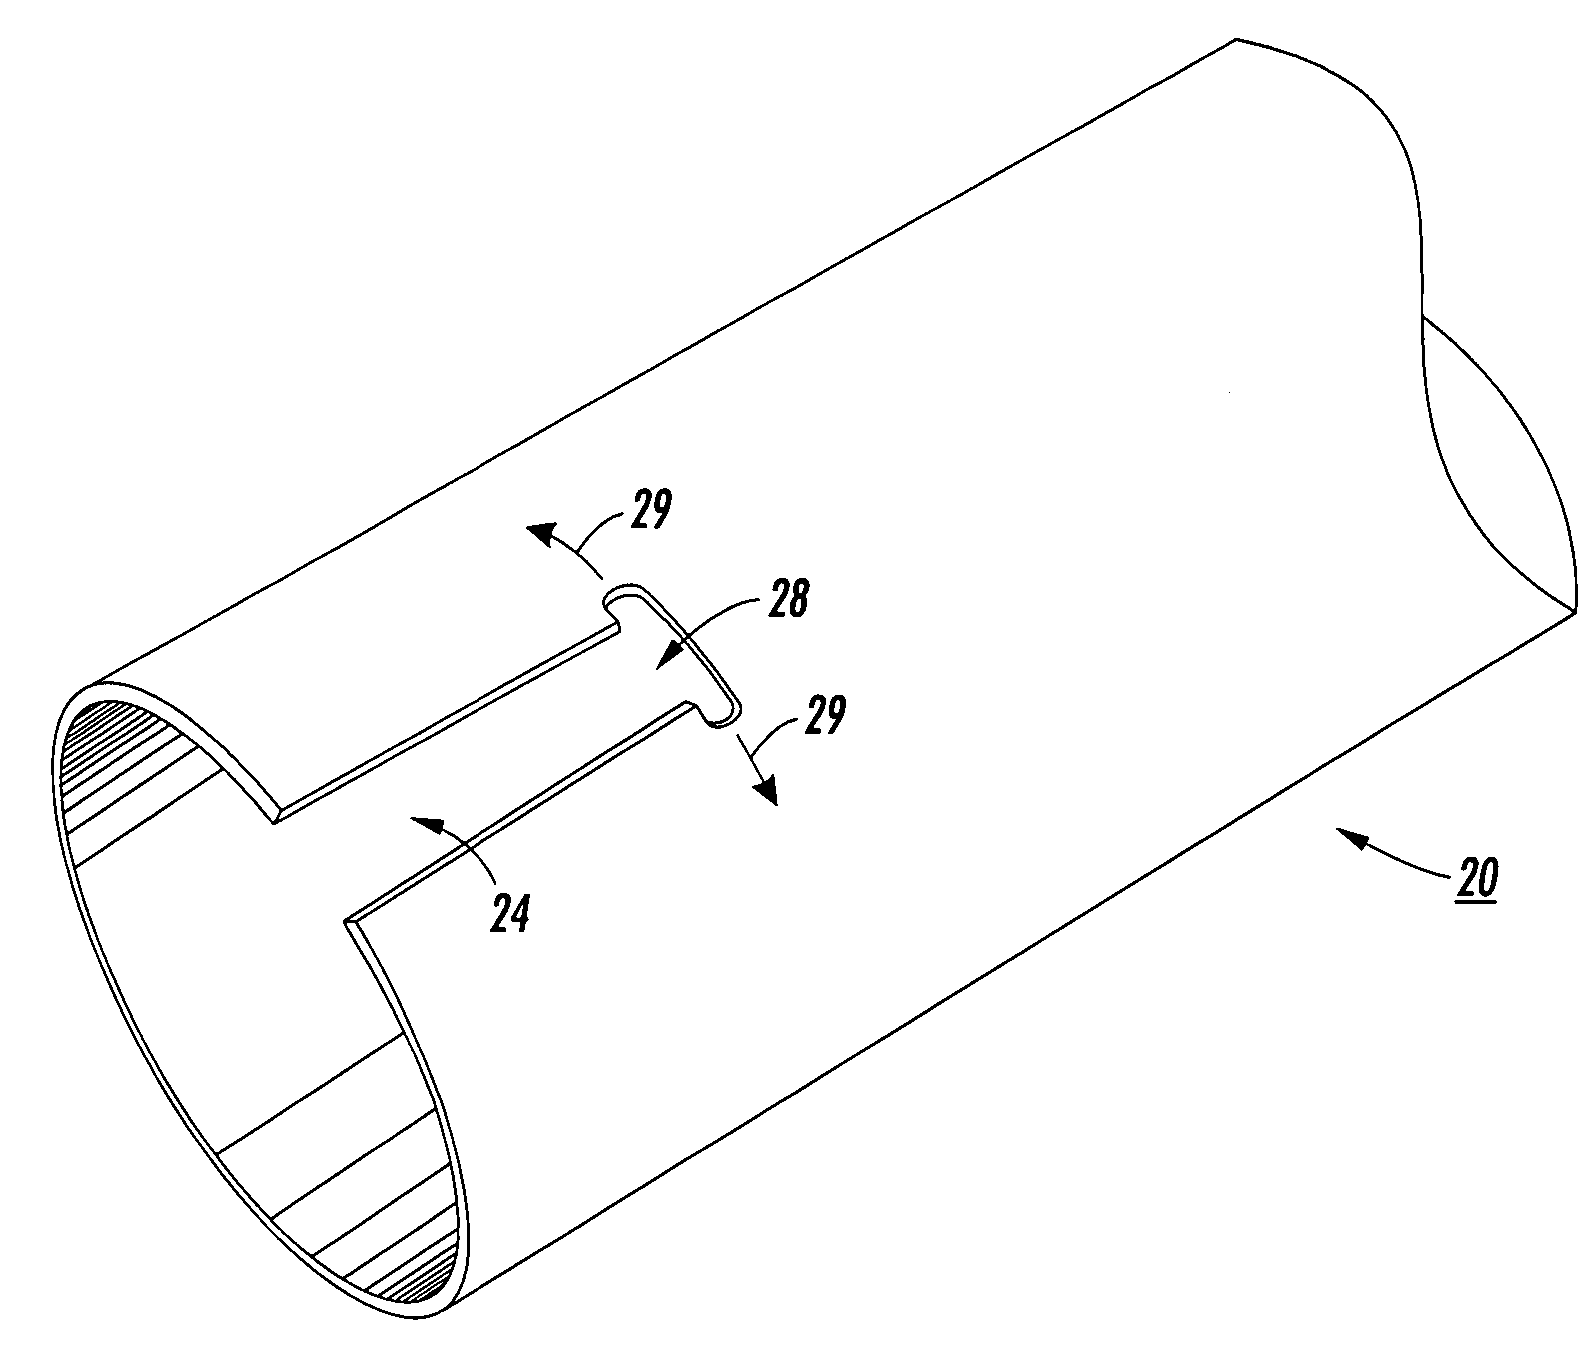 Thin walled fuser roll with stress redirected from axial to radial direction